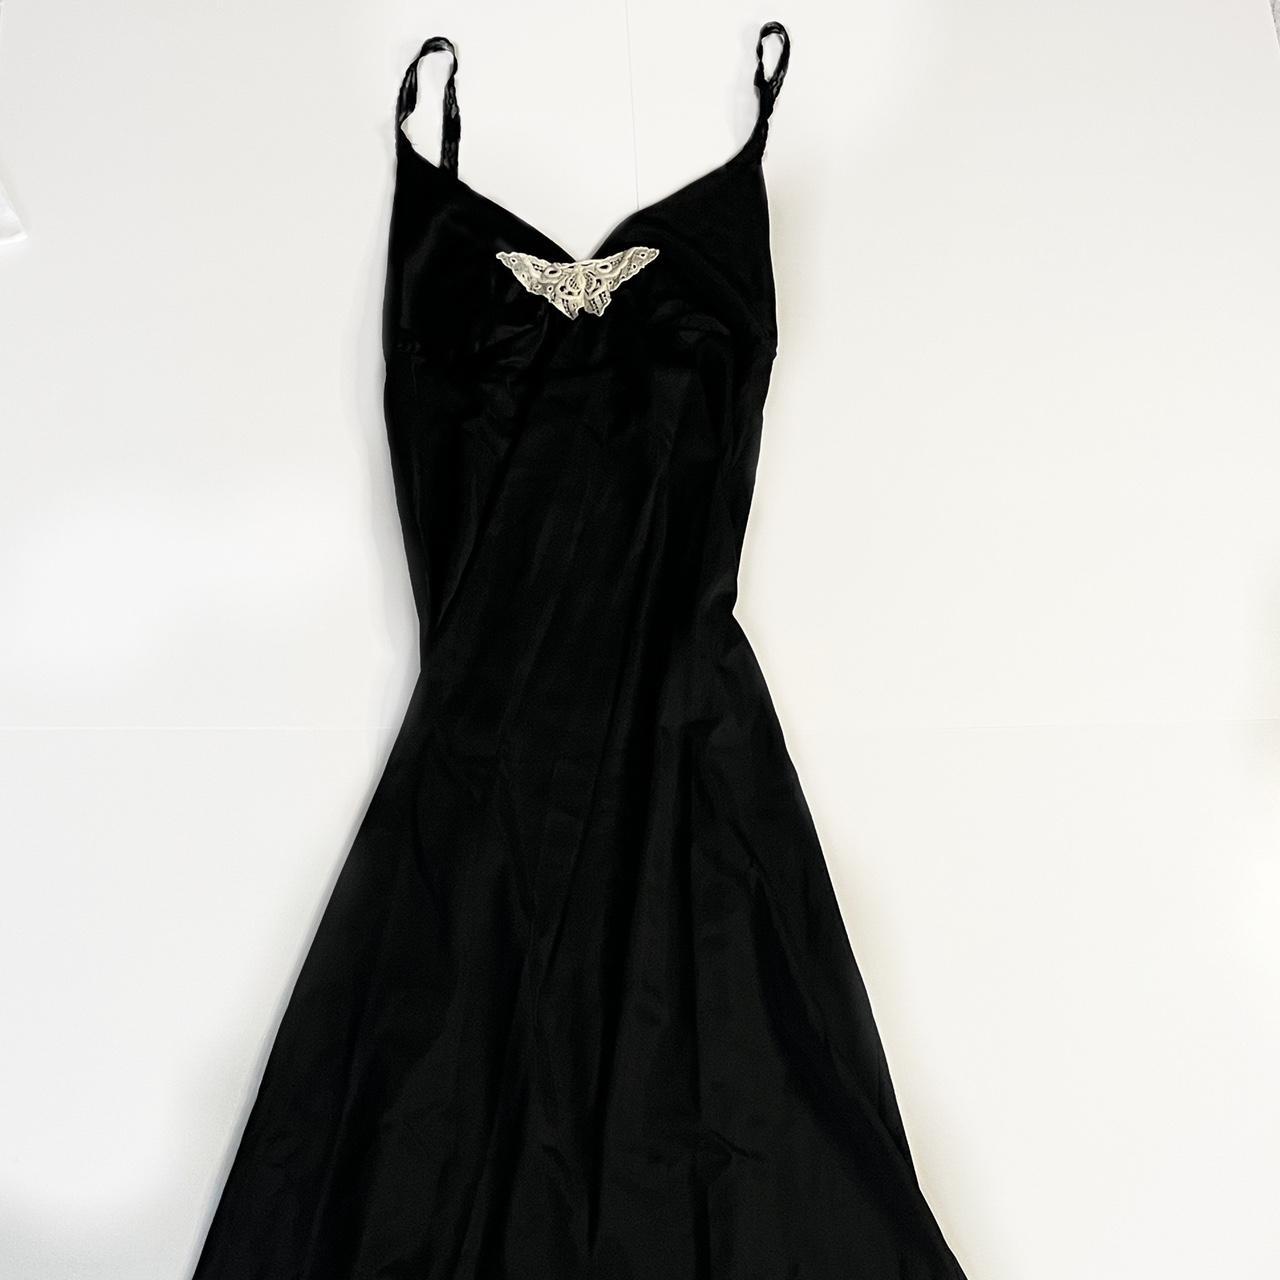 Frederick's of Hollywood Women's Black and White Dress (2)